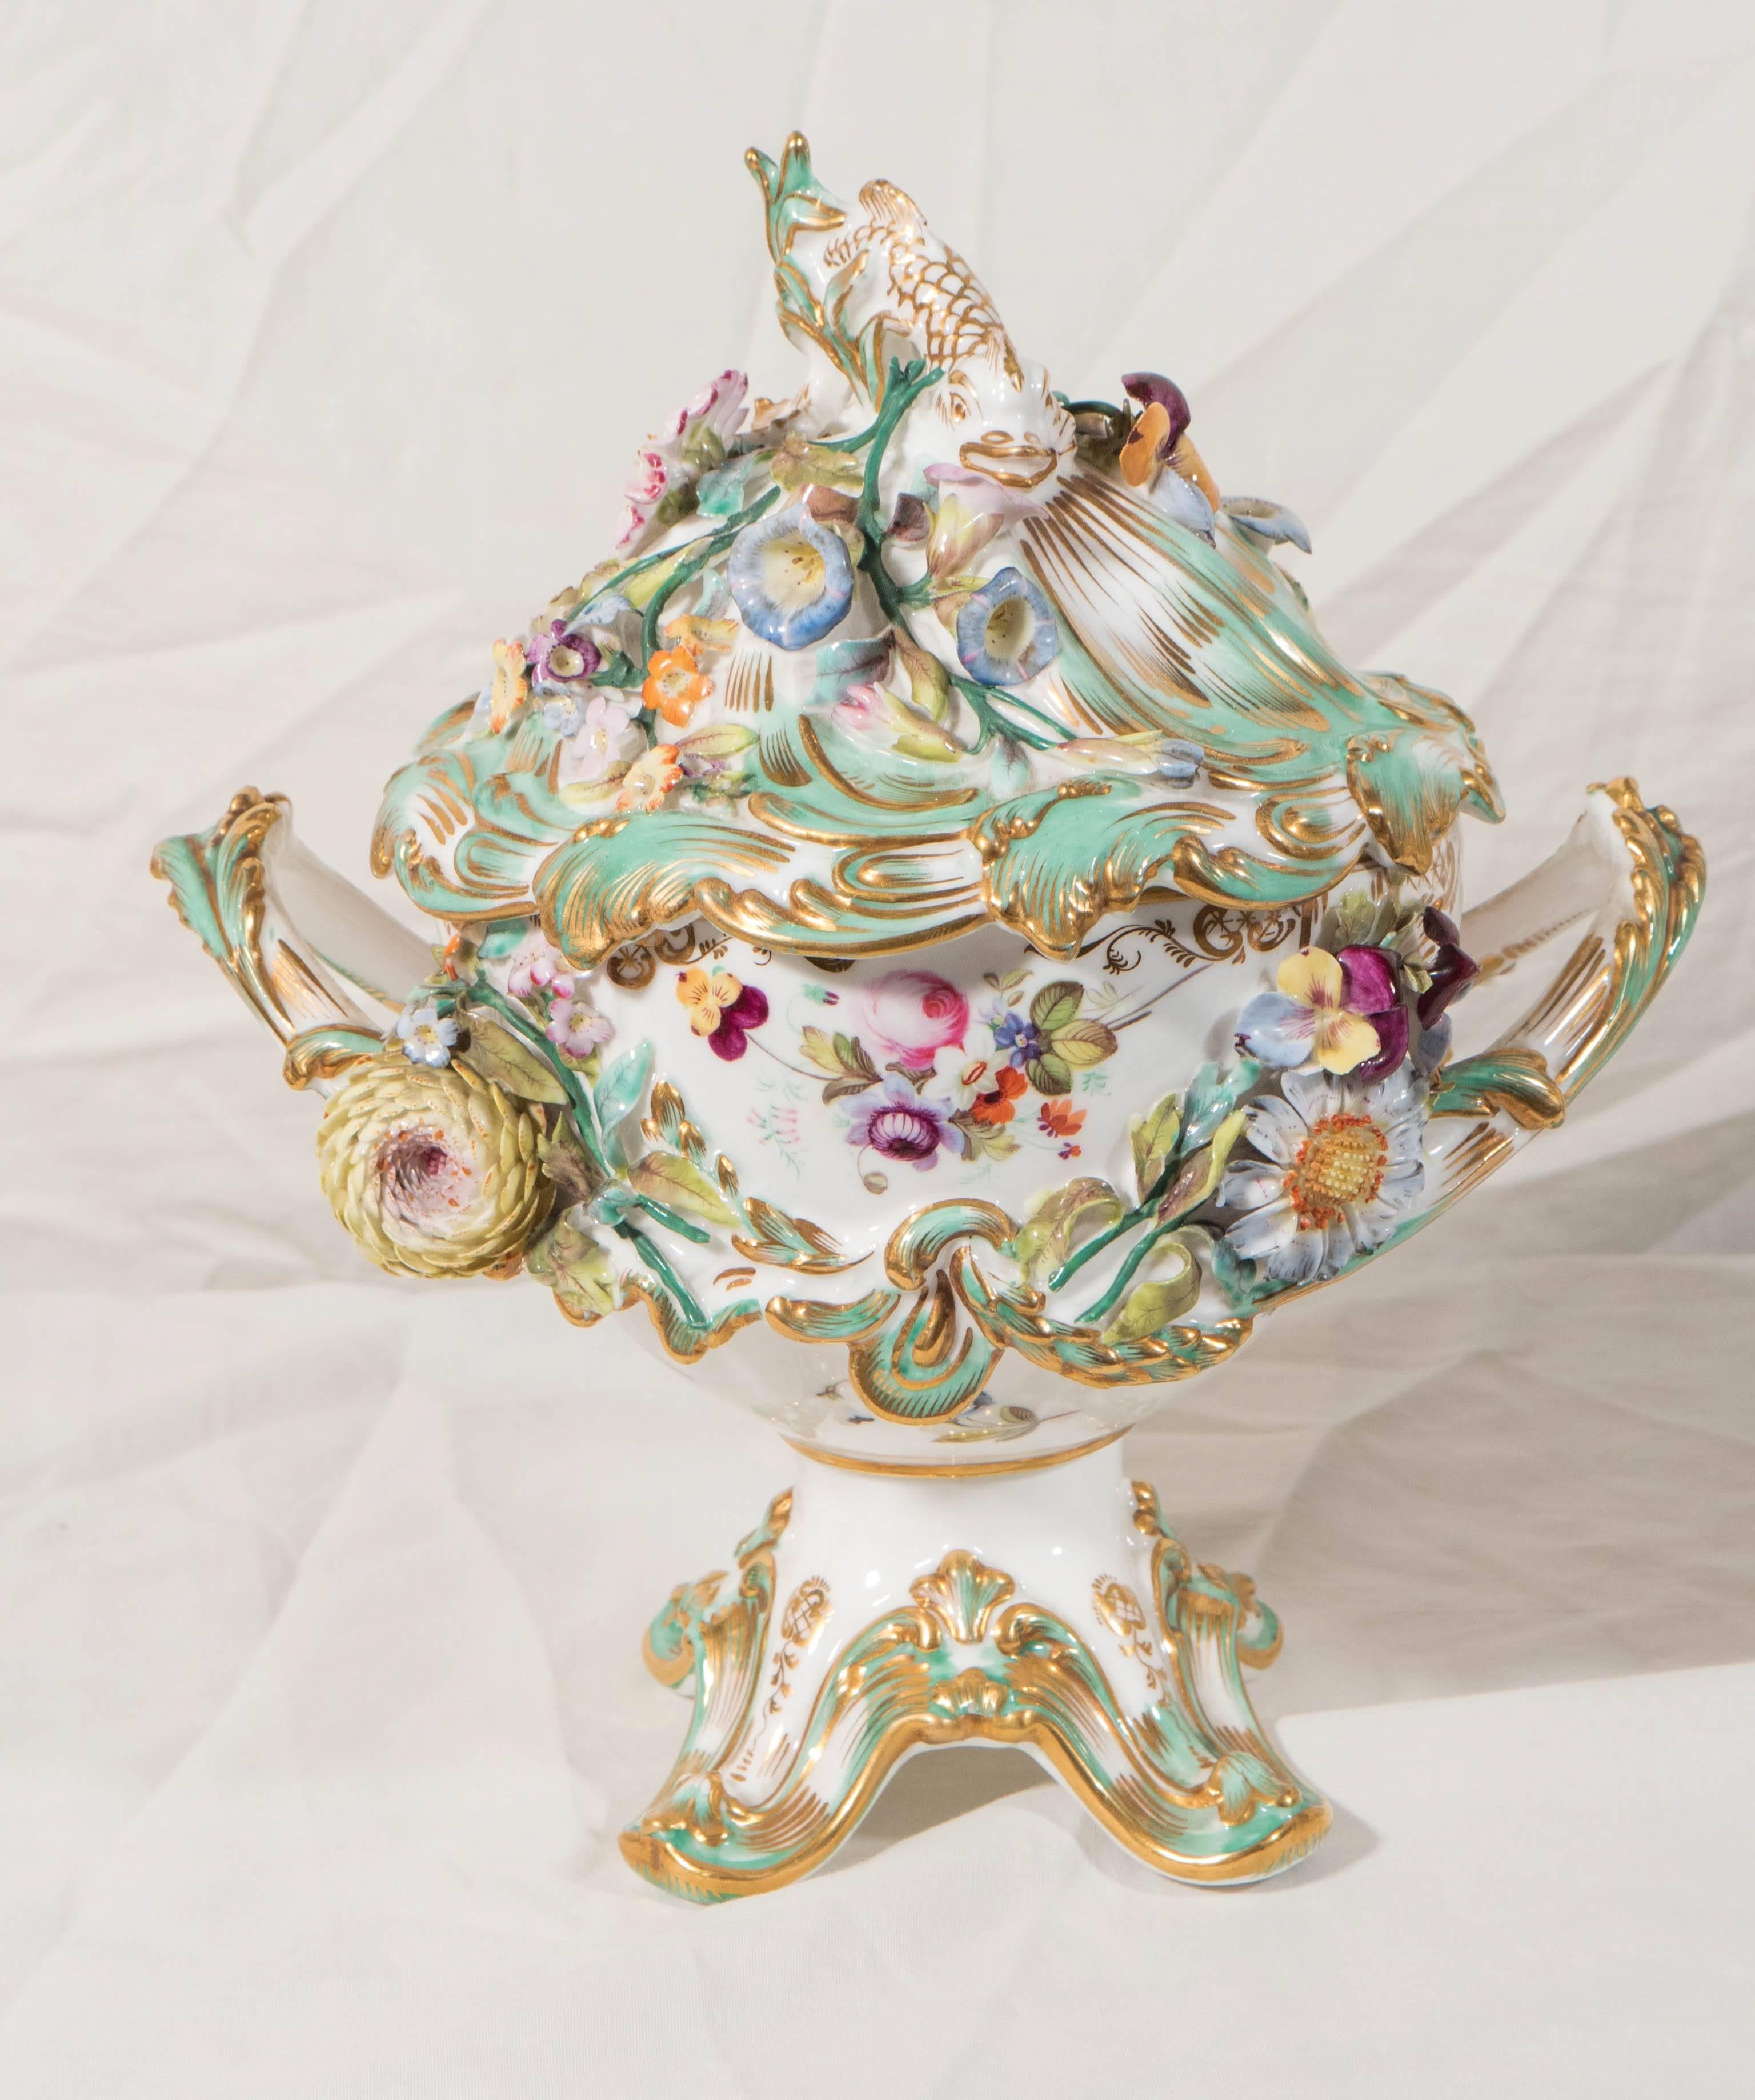 A pair of English porcelain flower-encrusted vases decorated in the Rococo style. The flowers on these vases were made separately and then applied to the surface of each piece. The handles are made to look like branches. The covers have dolphin